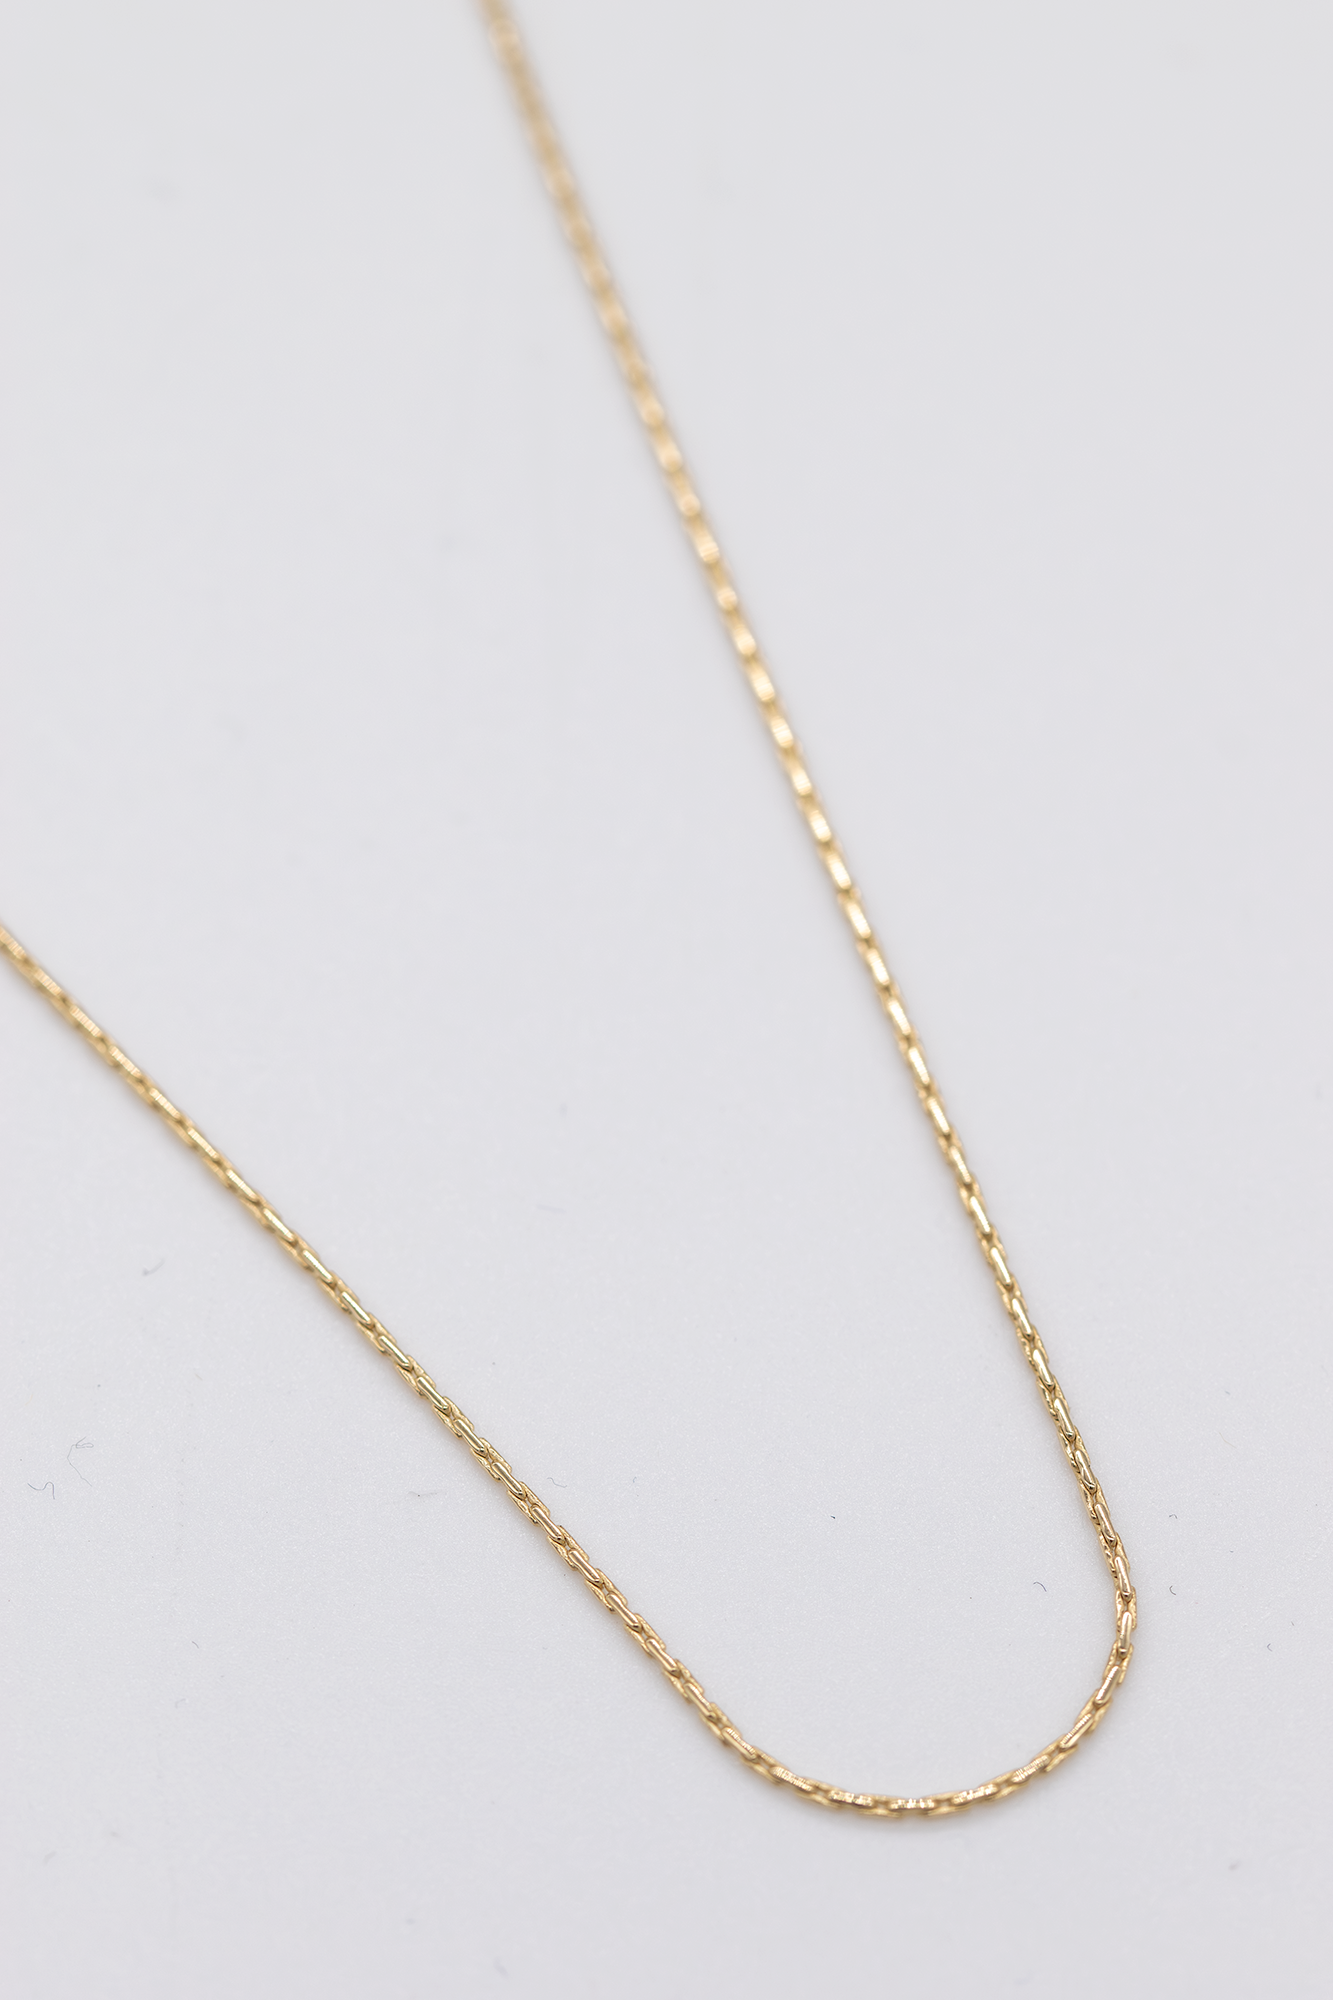 14K SUPER THIN NECKLACE 2.4 GRAMS